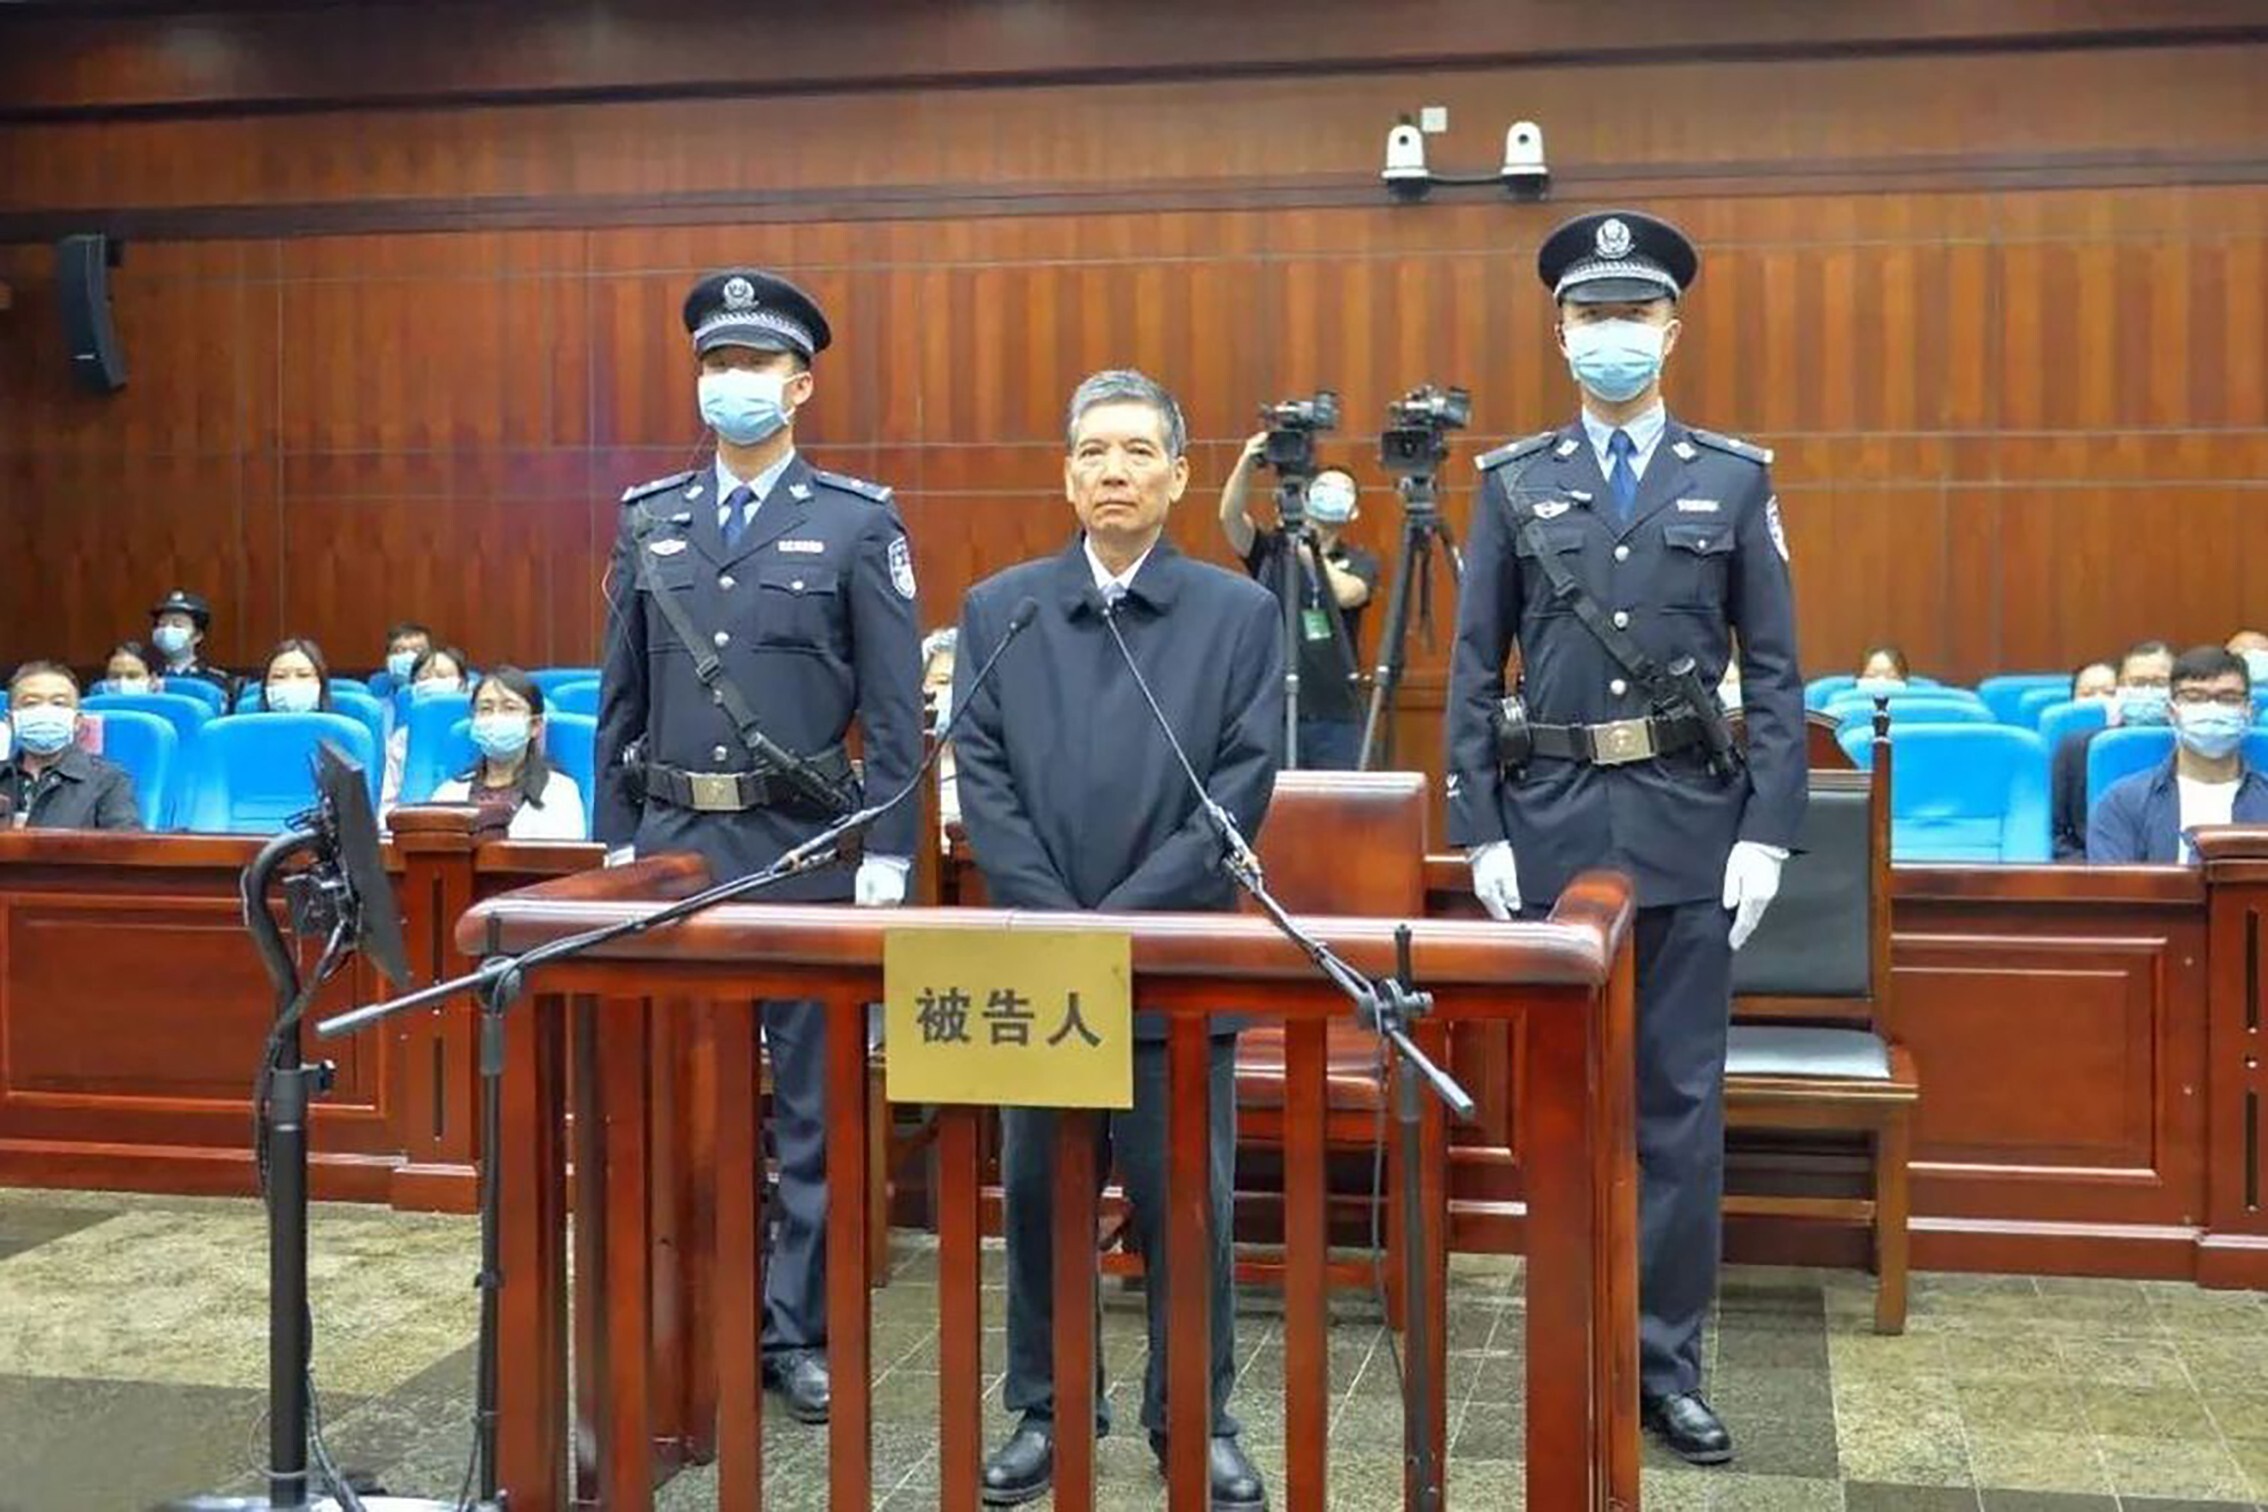 Qin Guangrong, the former Communist Party boss of Yunnan province, was sentenced to seven years in jail. Photo: Handout